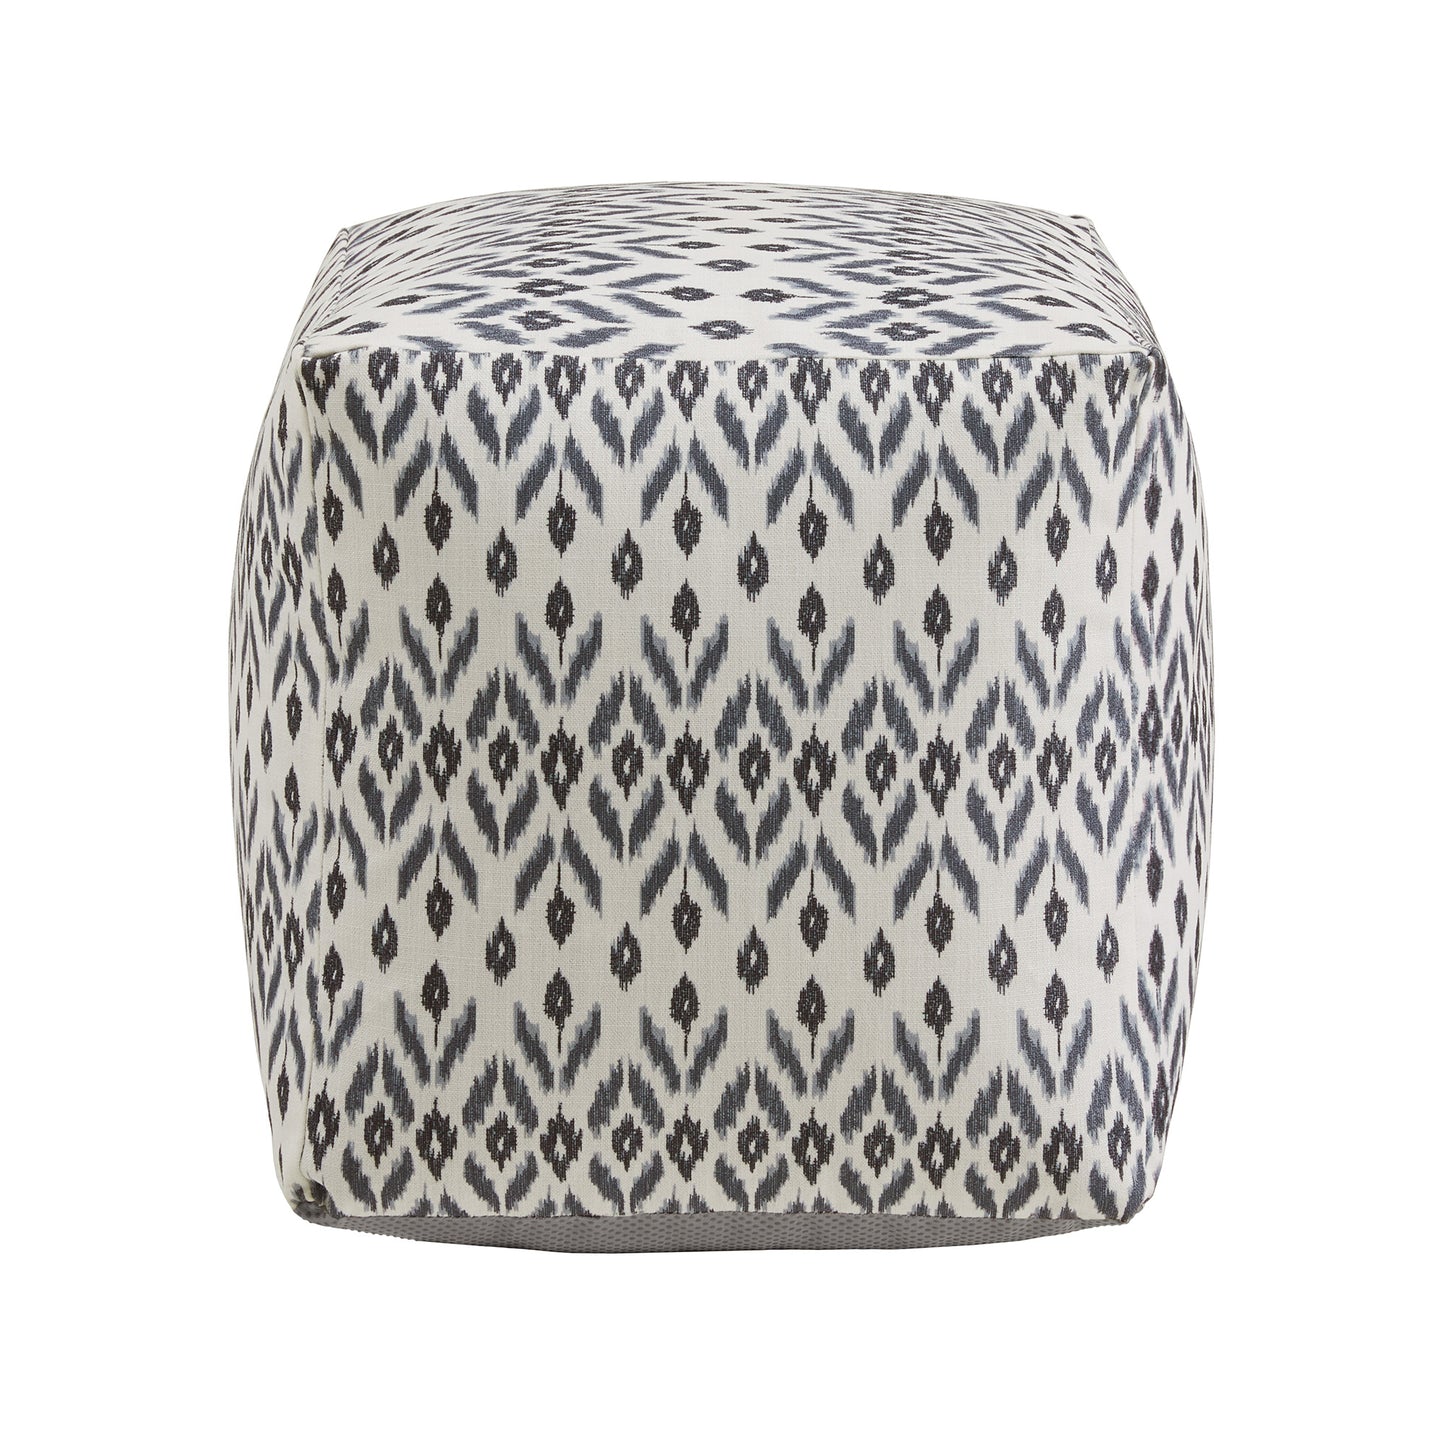 Upholstered Square Pouf Ottoman - Ivory & Blue Abstract Diamond Pattern Fabric